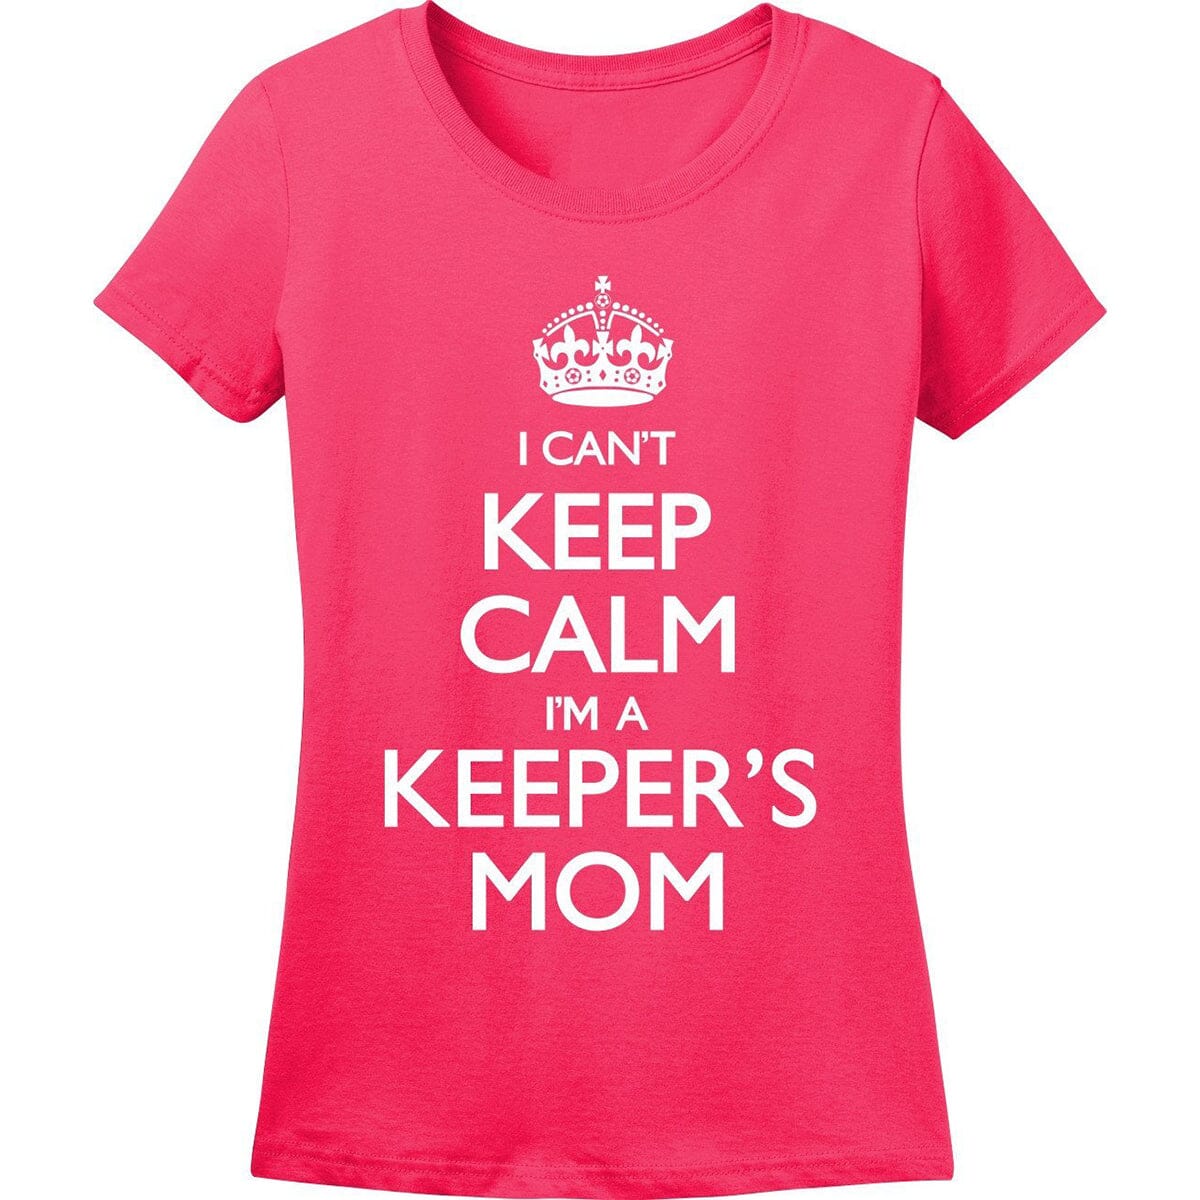 I Can't Keep Calm I'm A Keeper's Mom Soccer T-Shirt Humorous Shirt 411 Small (fitted) Safety Pink Ladies